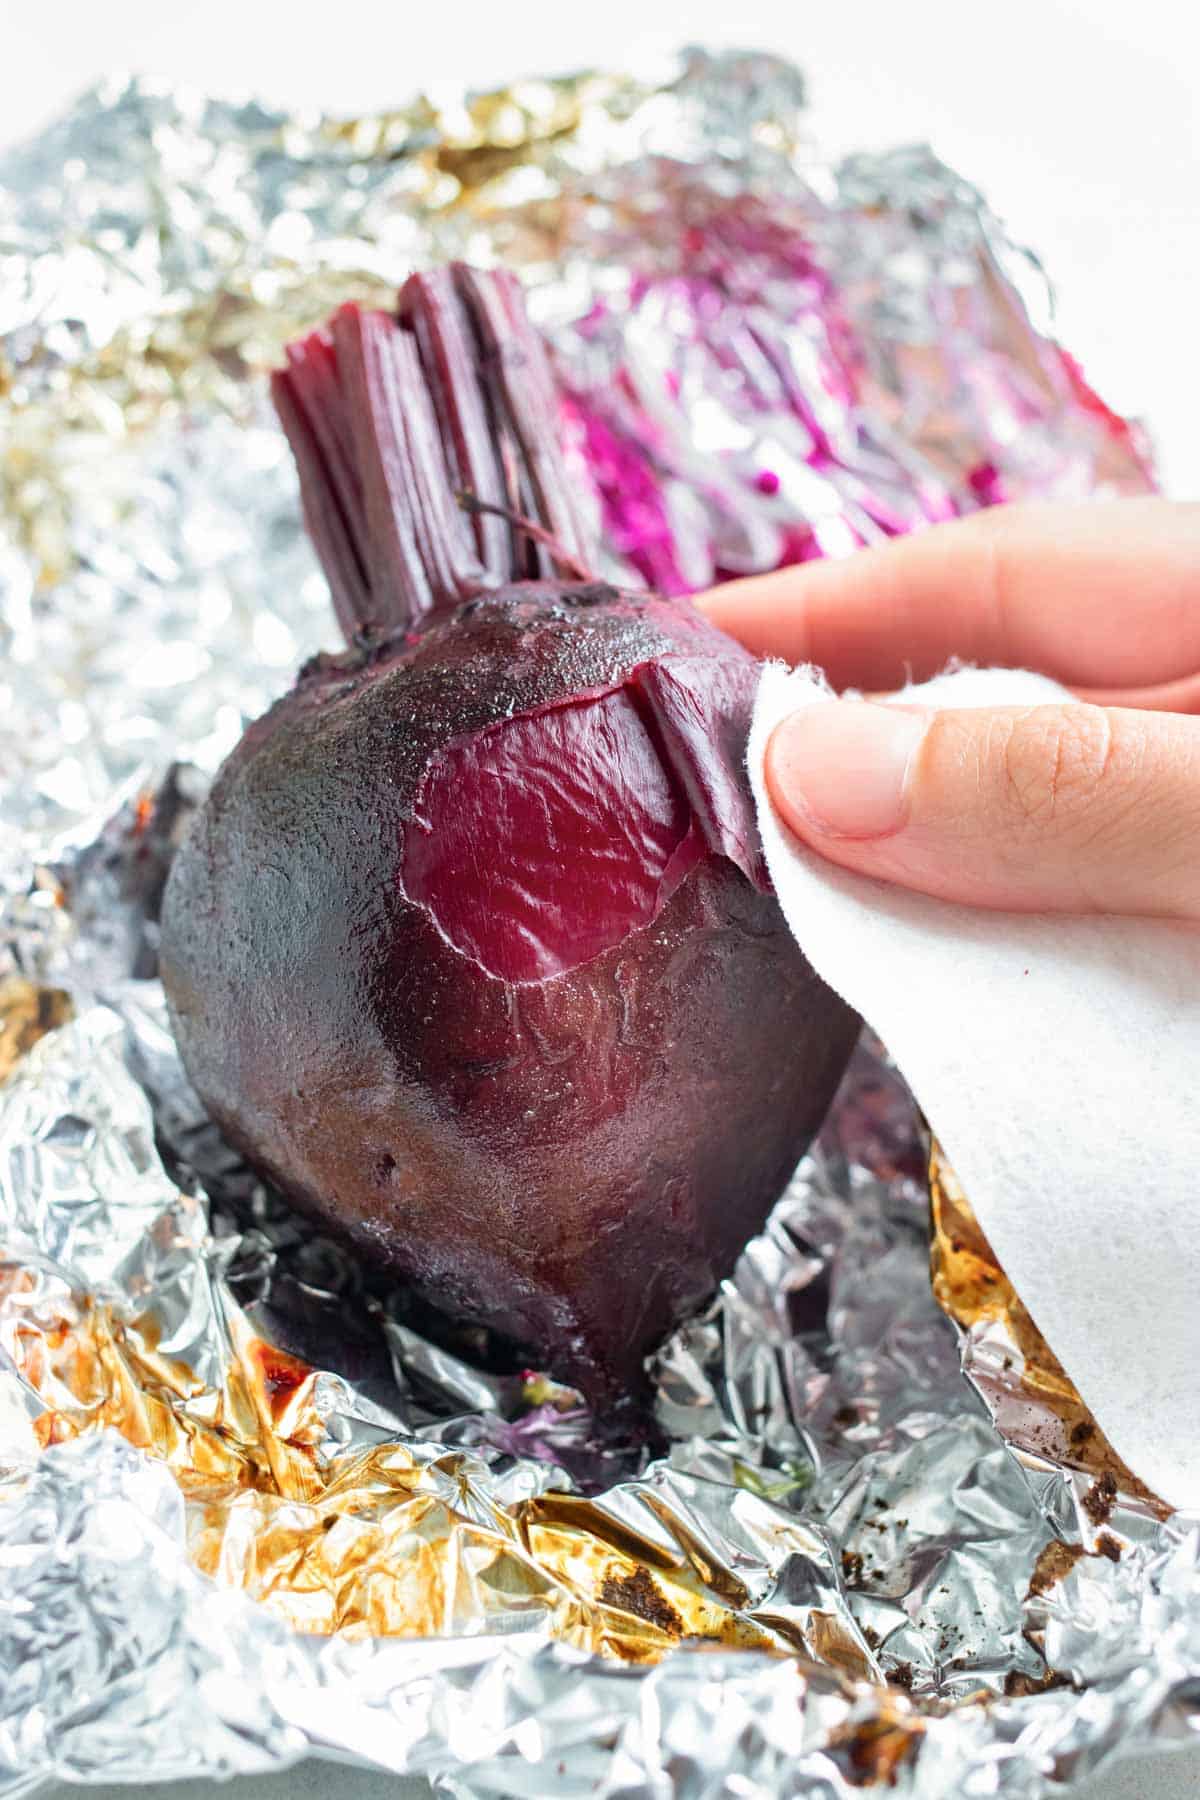 Baked beets are peeled using a paper towel after roasting in the oven.